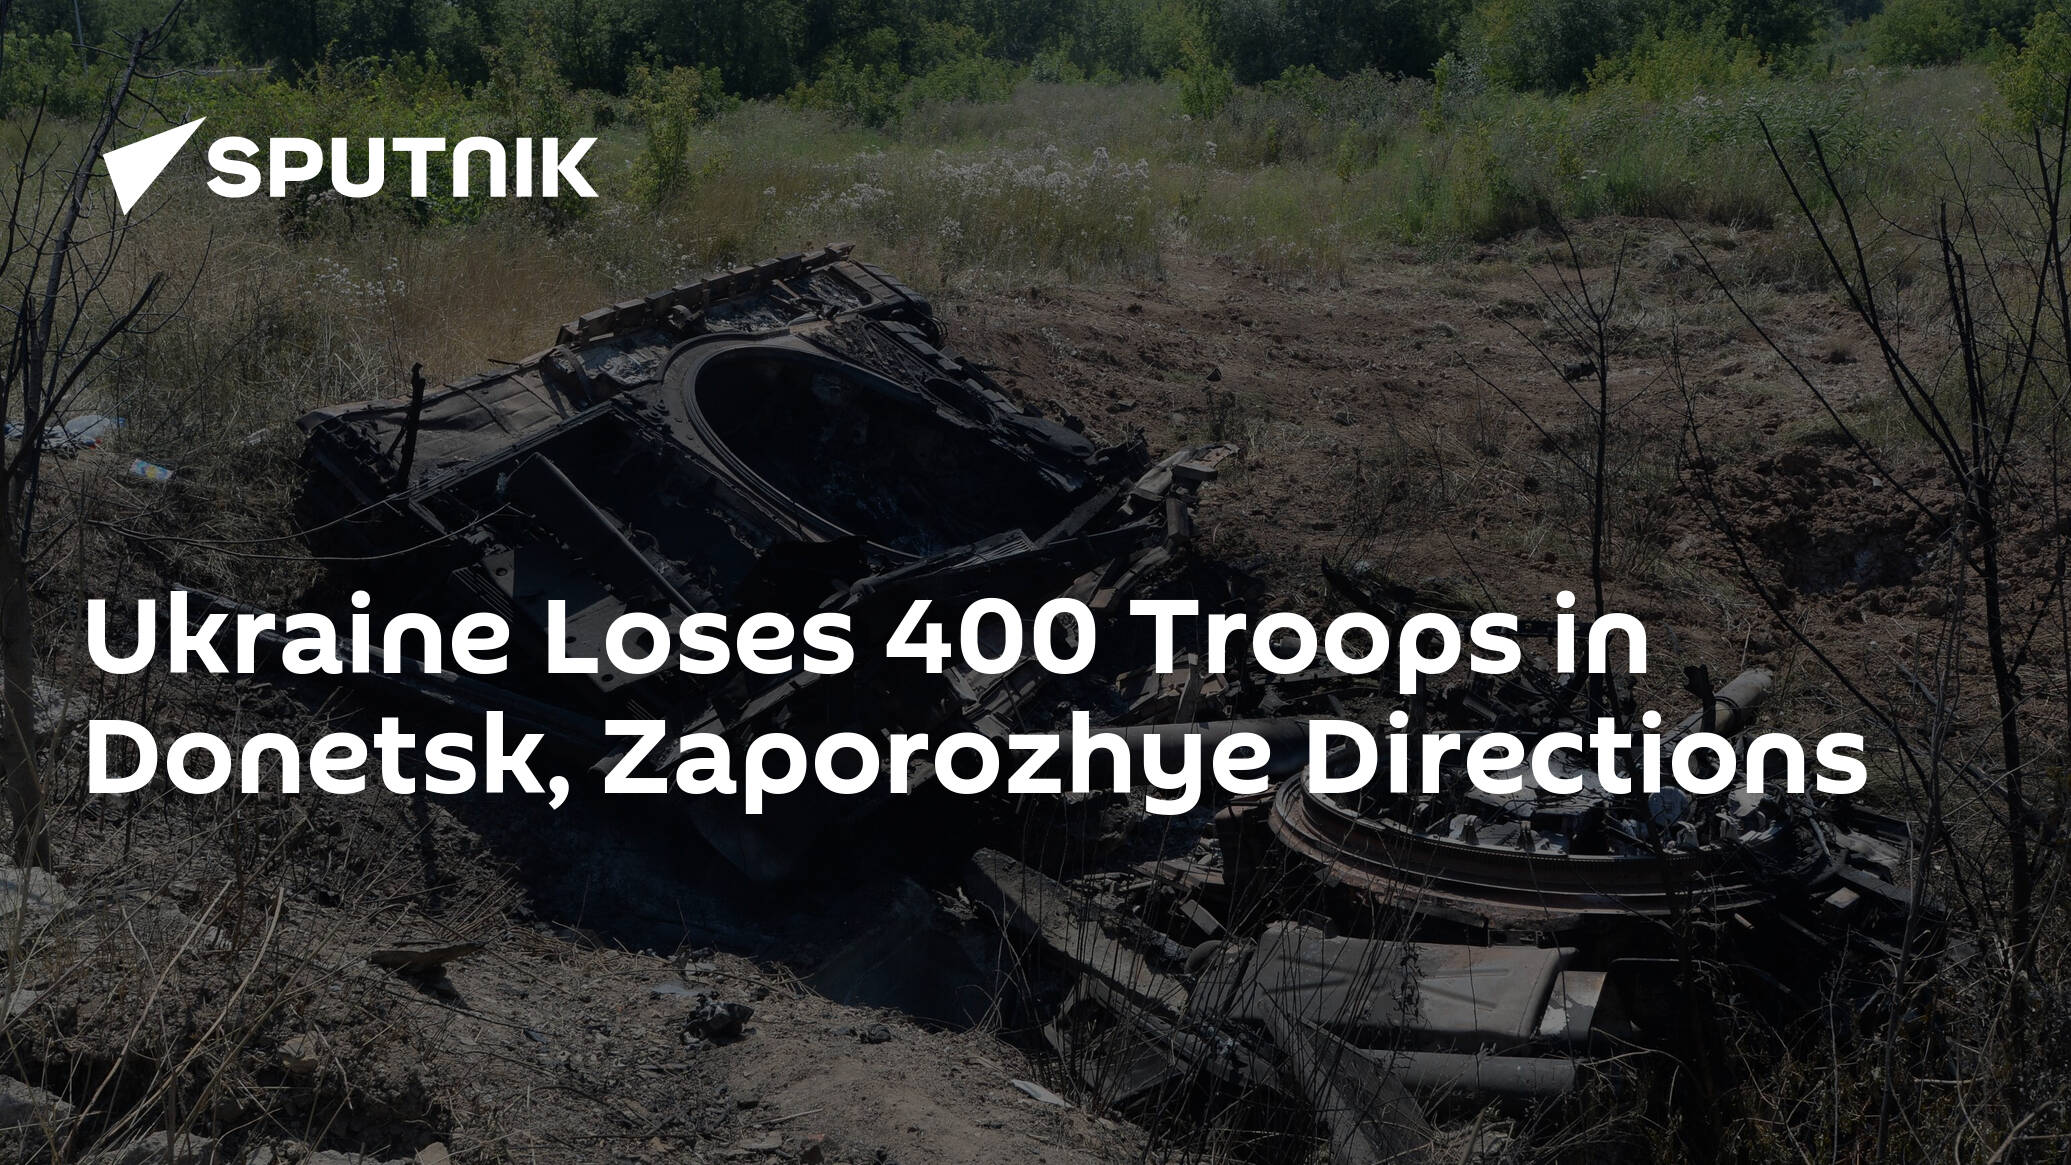 Ukraine Loses 400 Troops in Donetsk, Zaporozhye Directions